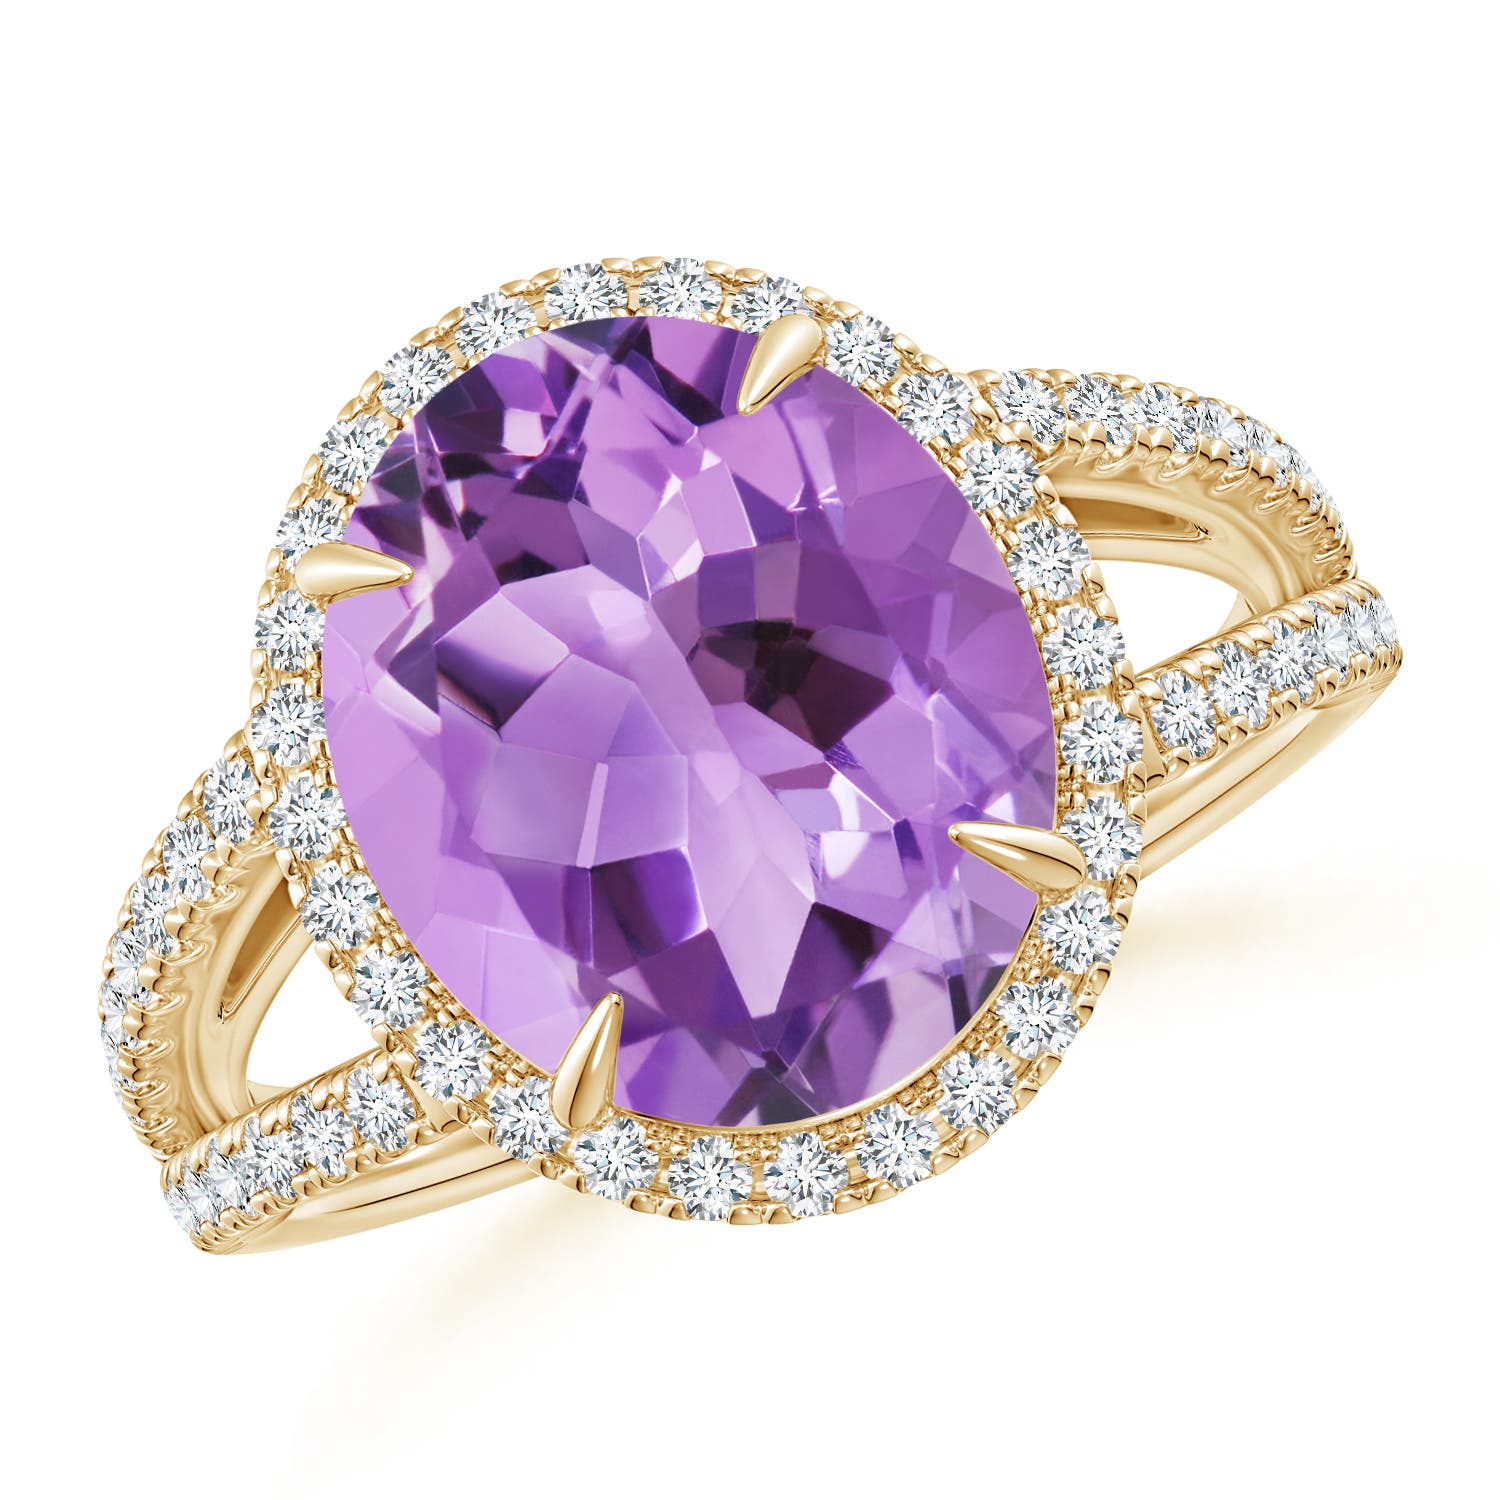 A - Amethyst / 4.84 CT / 14 KT Yellow Gold